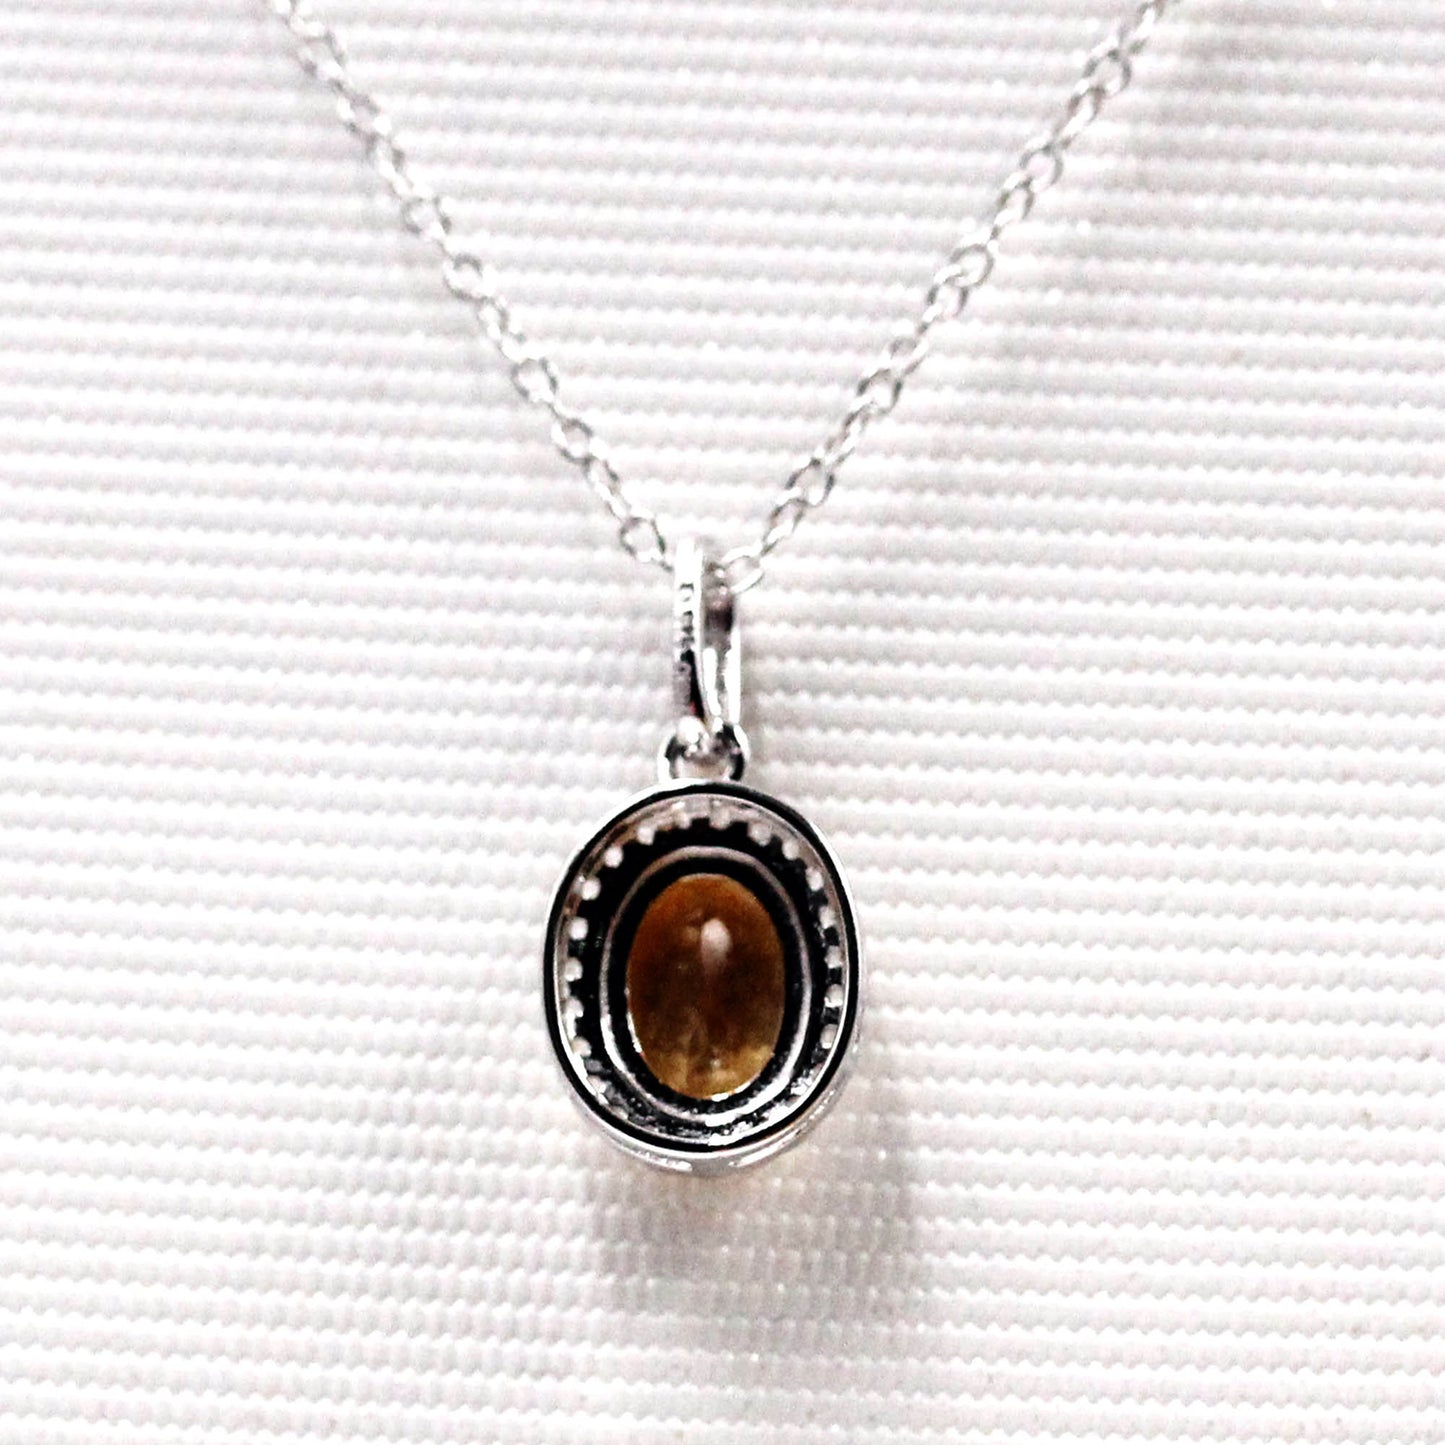 Sterling Silver Oval Citrine and White Topaz Pendant Necklace, 18" - Pinctore